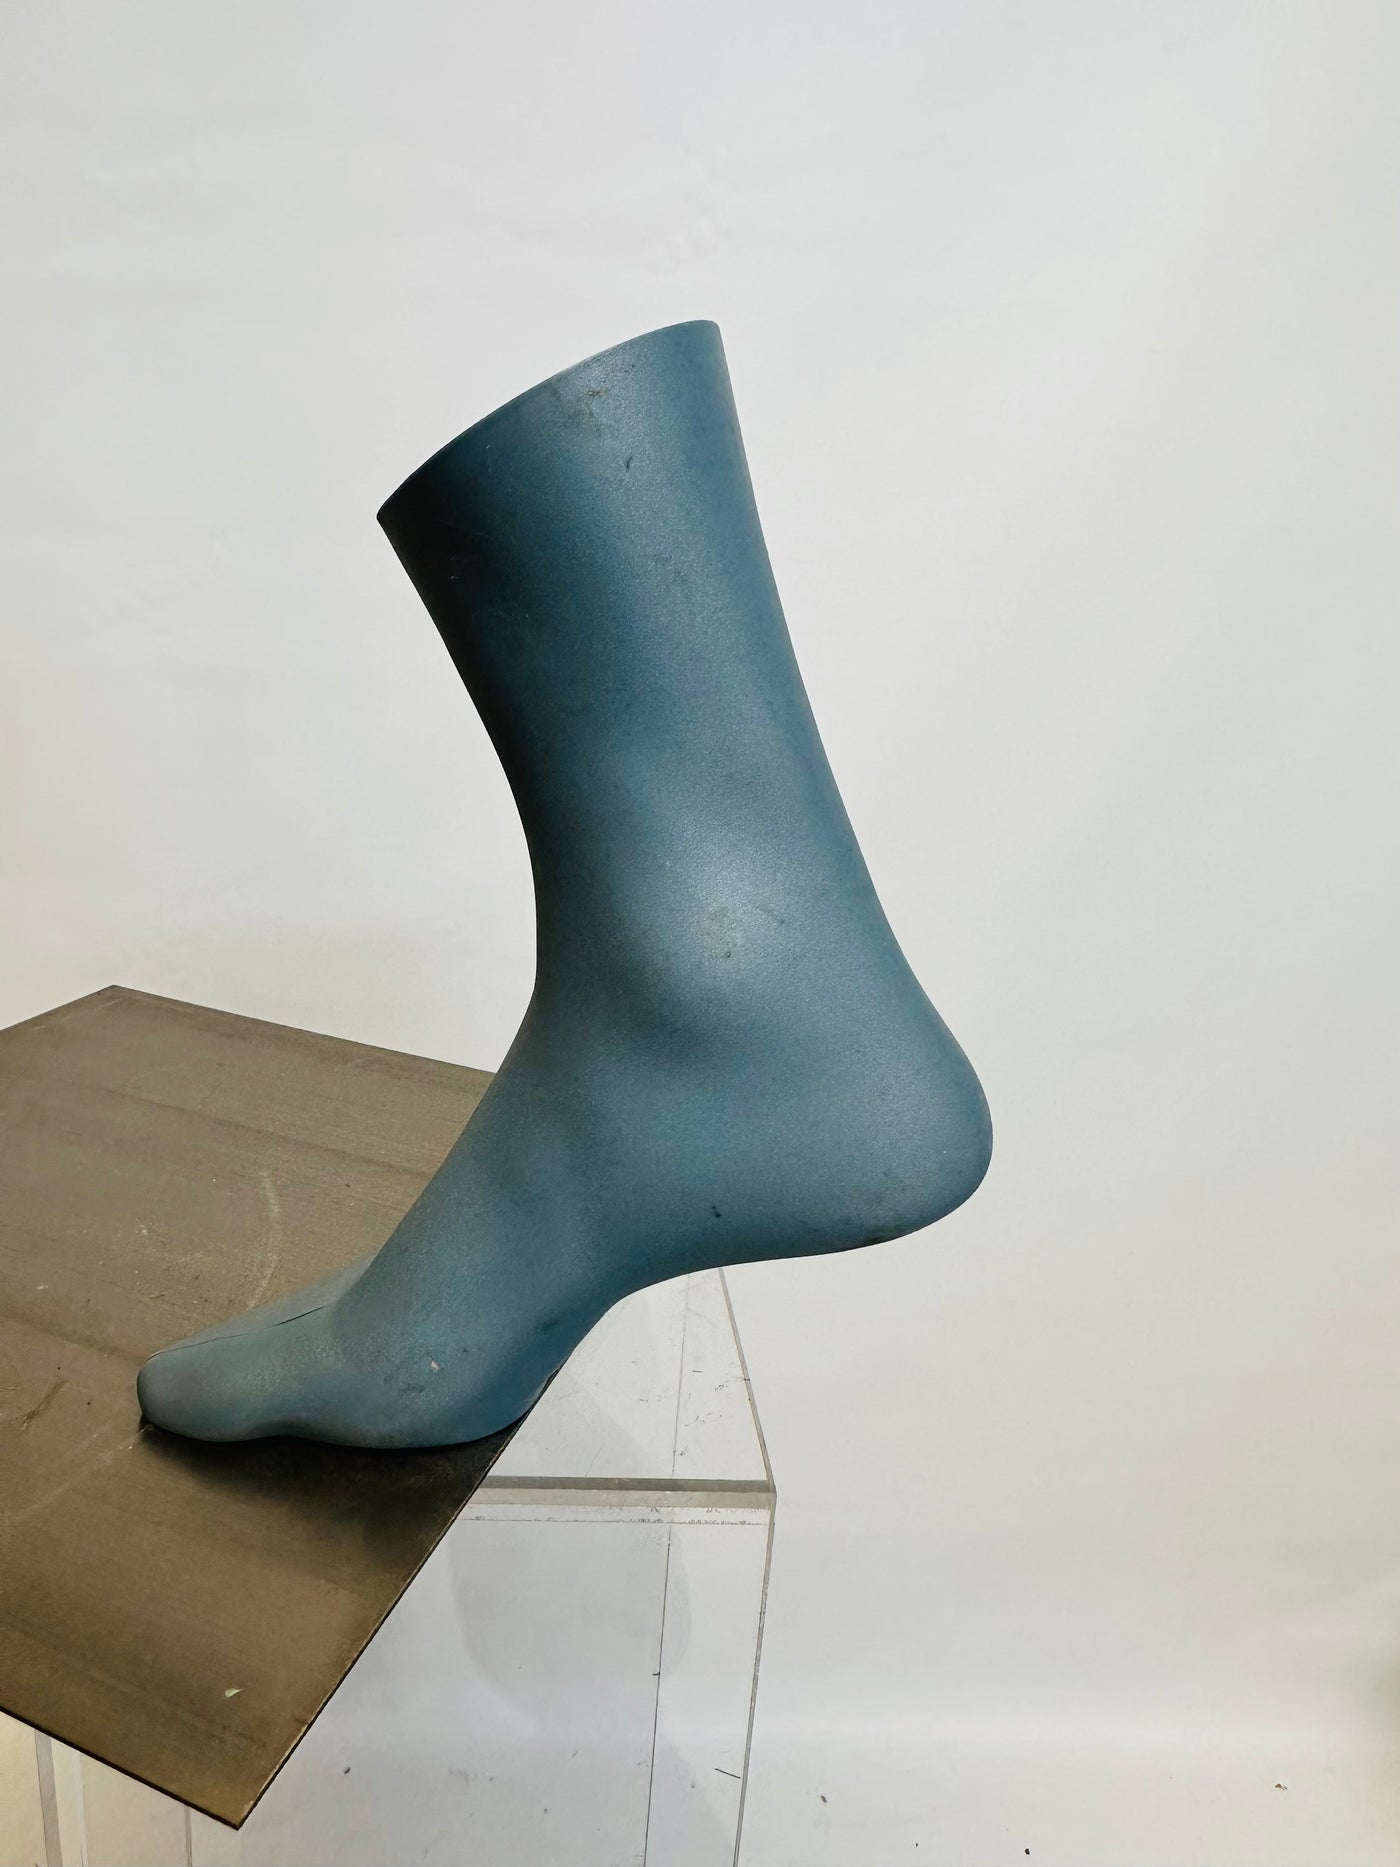 Used Male Sock Form  - 2 each